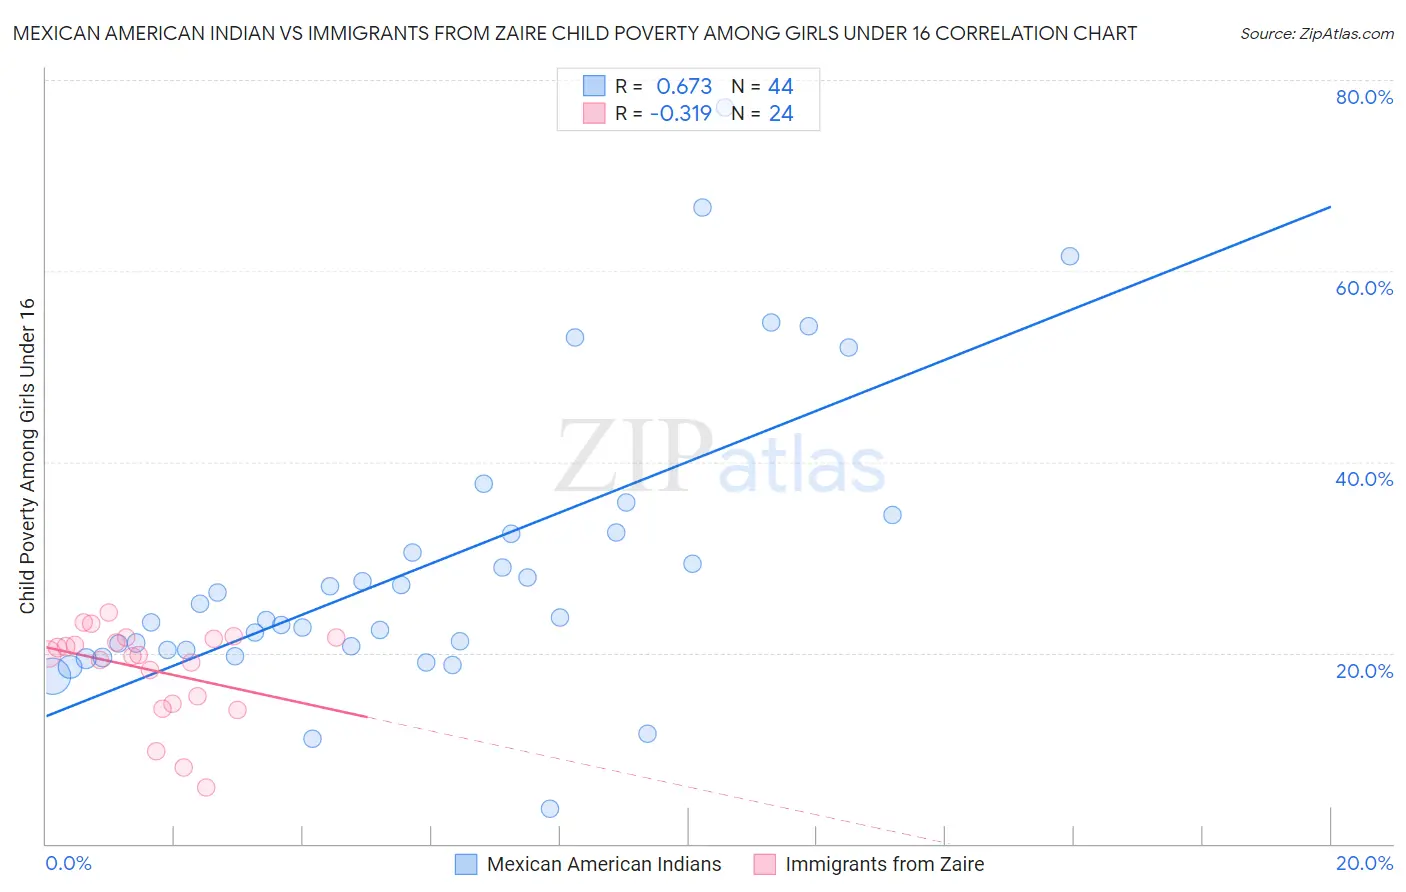 Mexican American Indian vs Immigrants from Zaire Child Poverty Among Girls Under 16